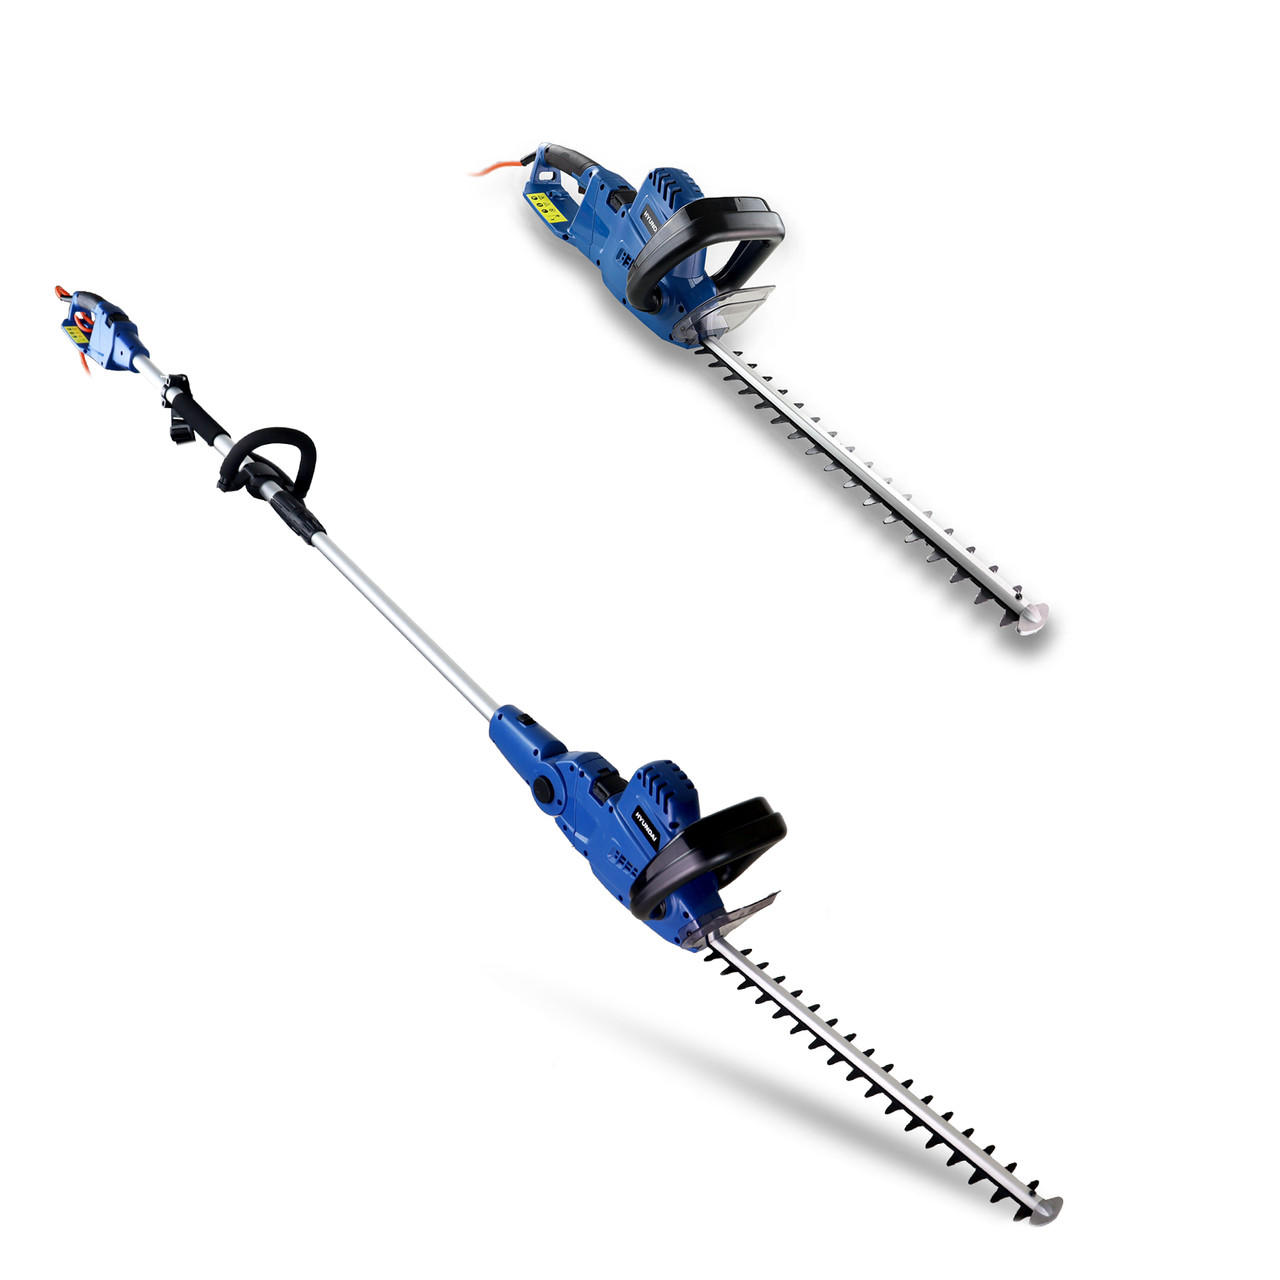 Hyundai HYP2HT550E 2-in-1 Extendable Electric Hedge Trimmer - 550W